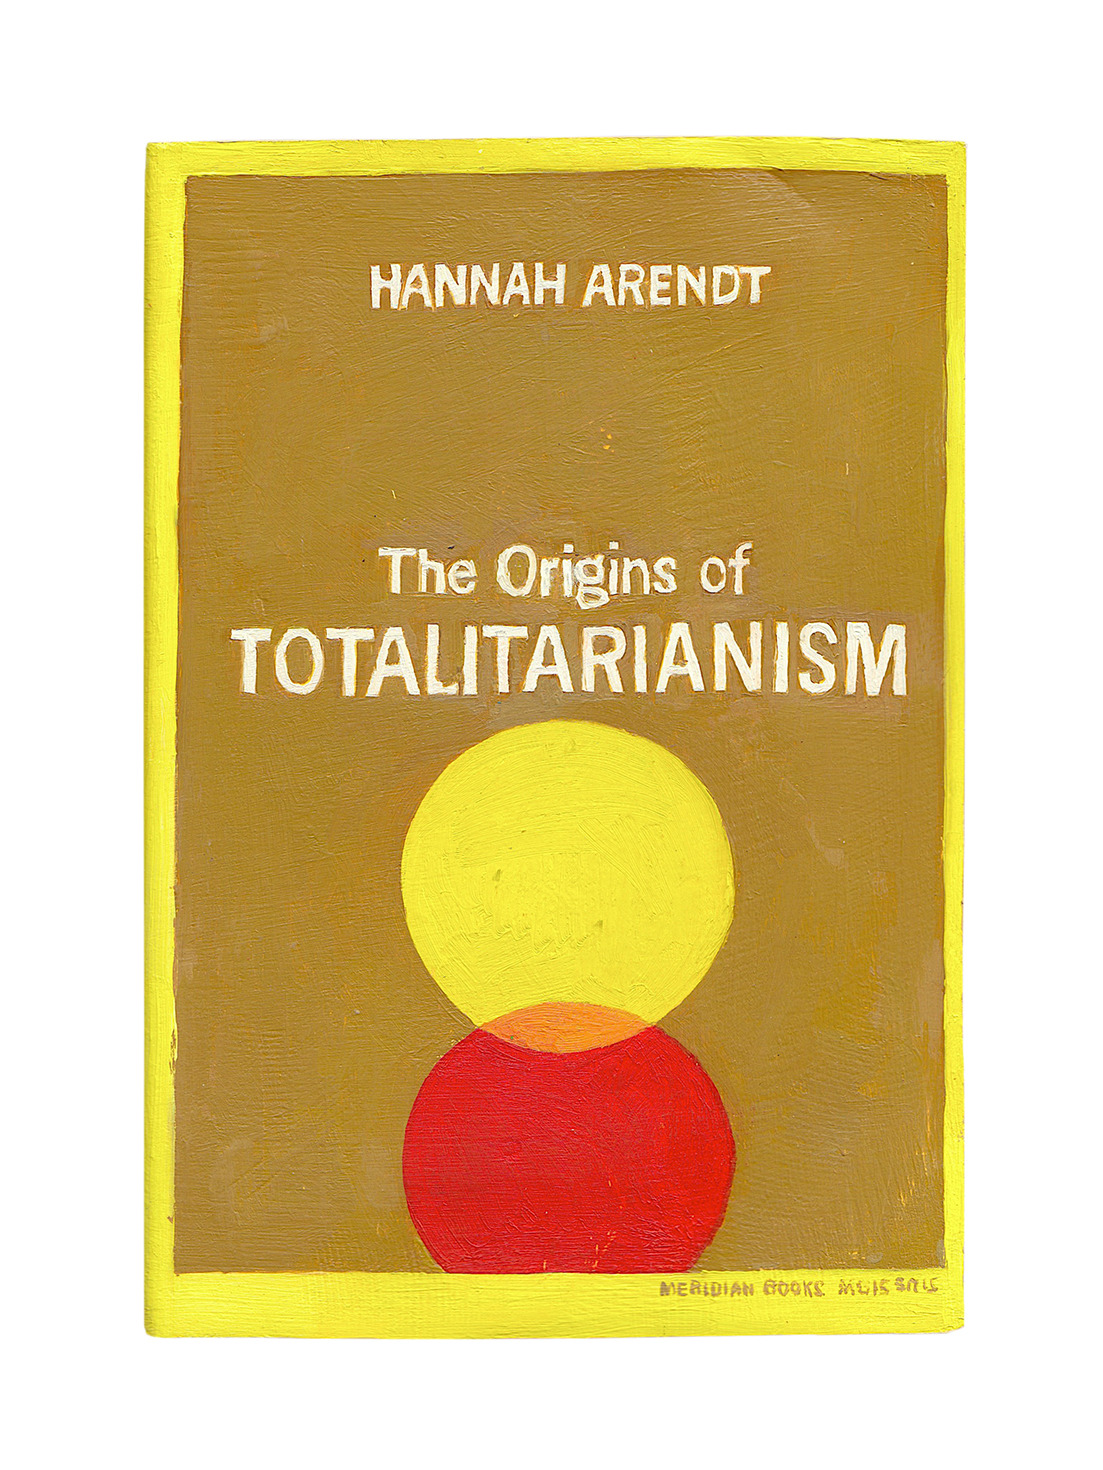 arendt hannah the origins of totalitarianism